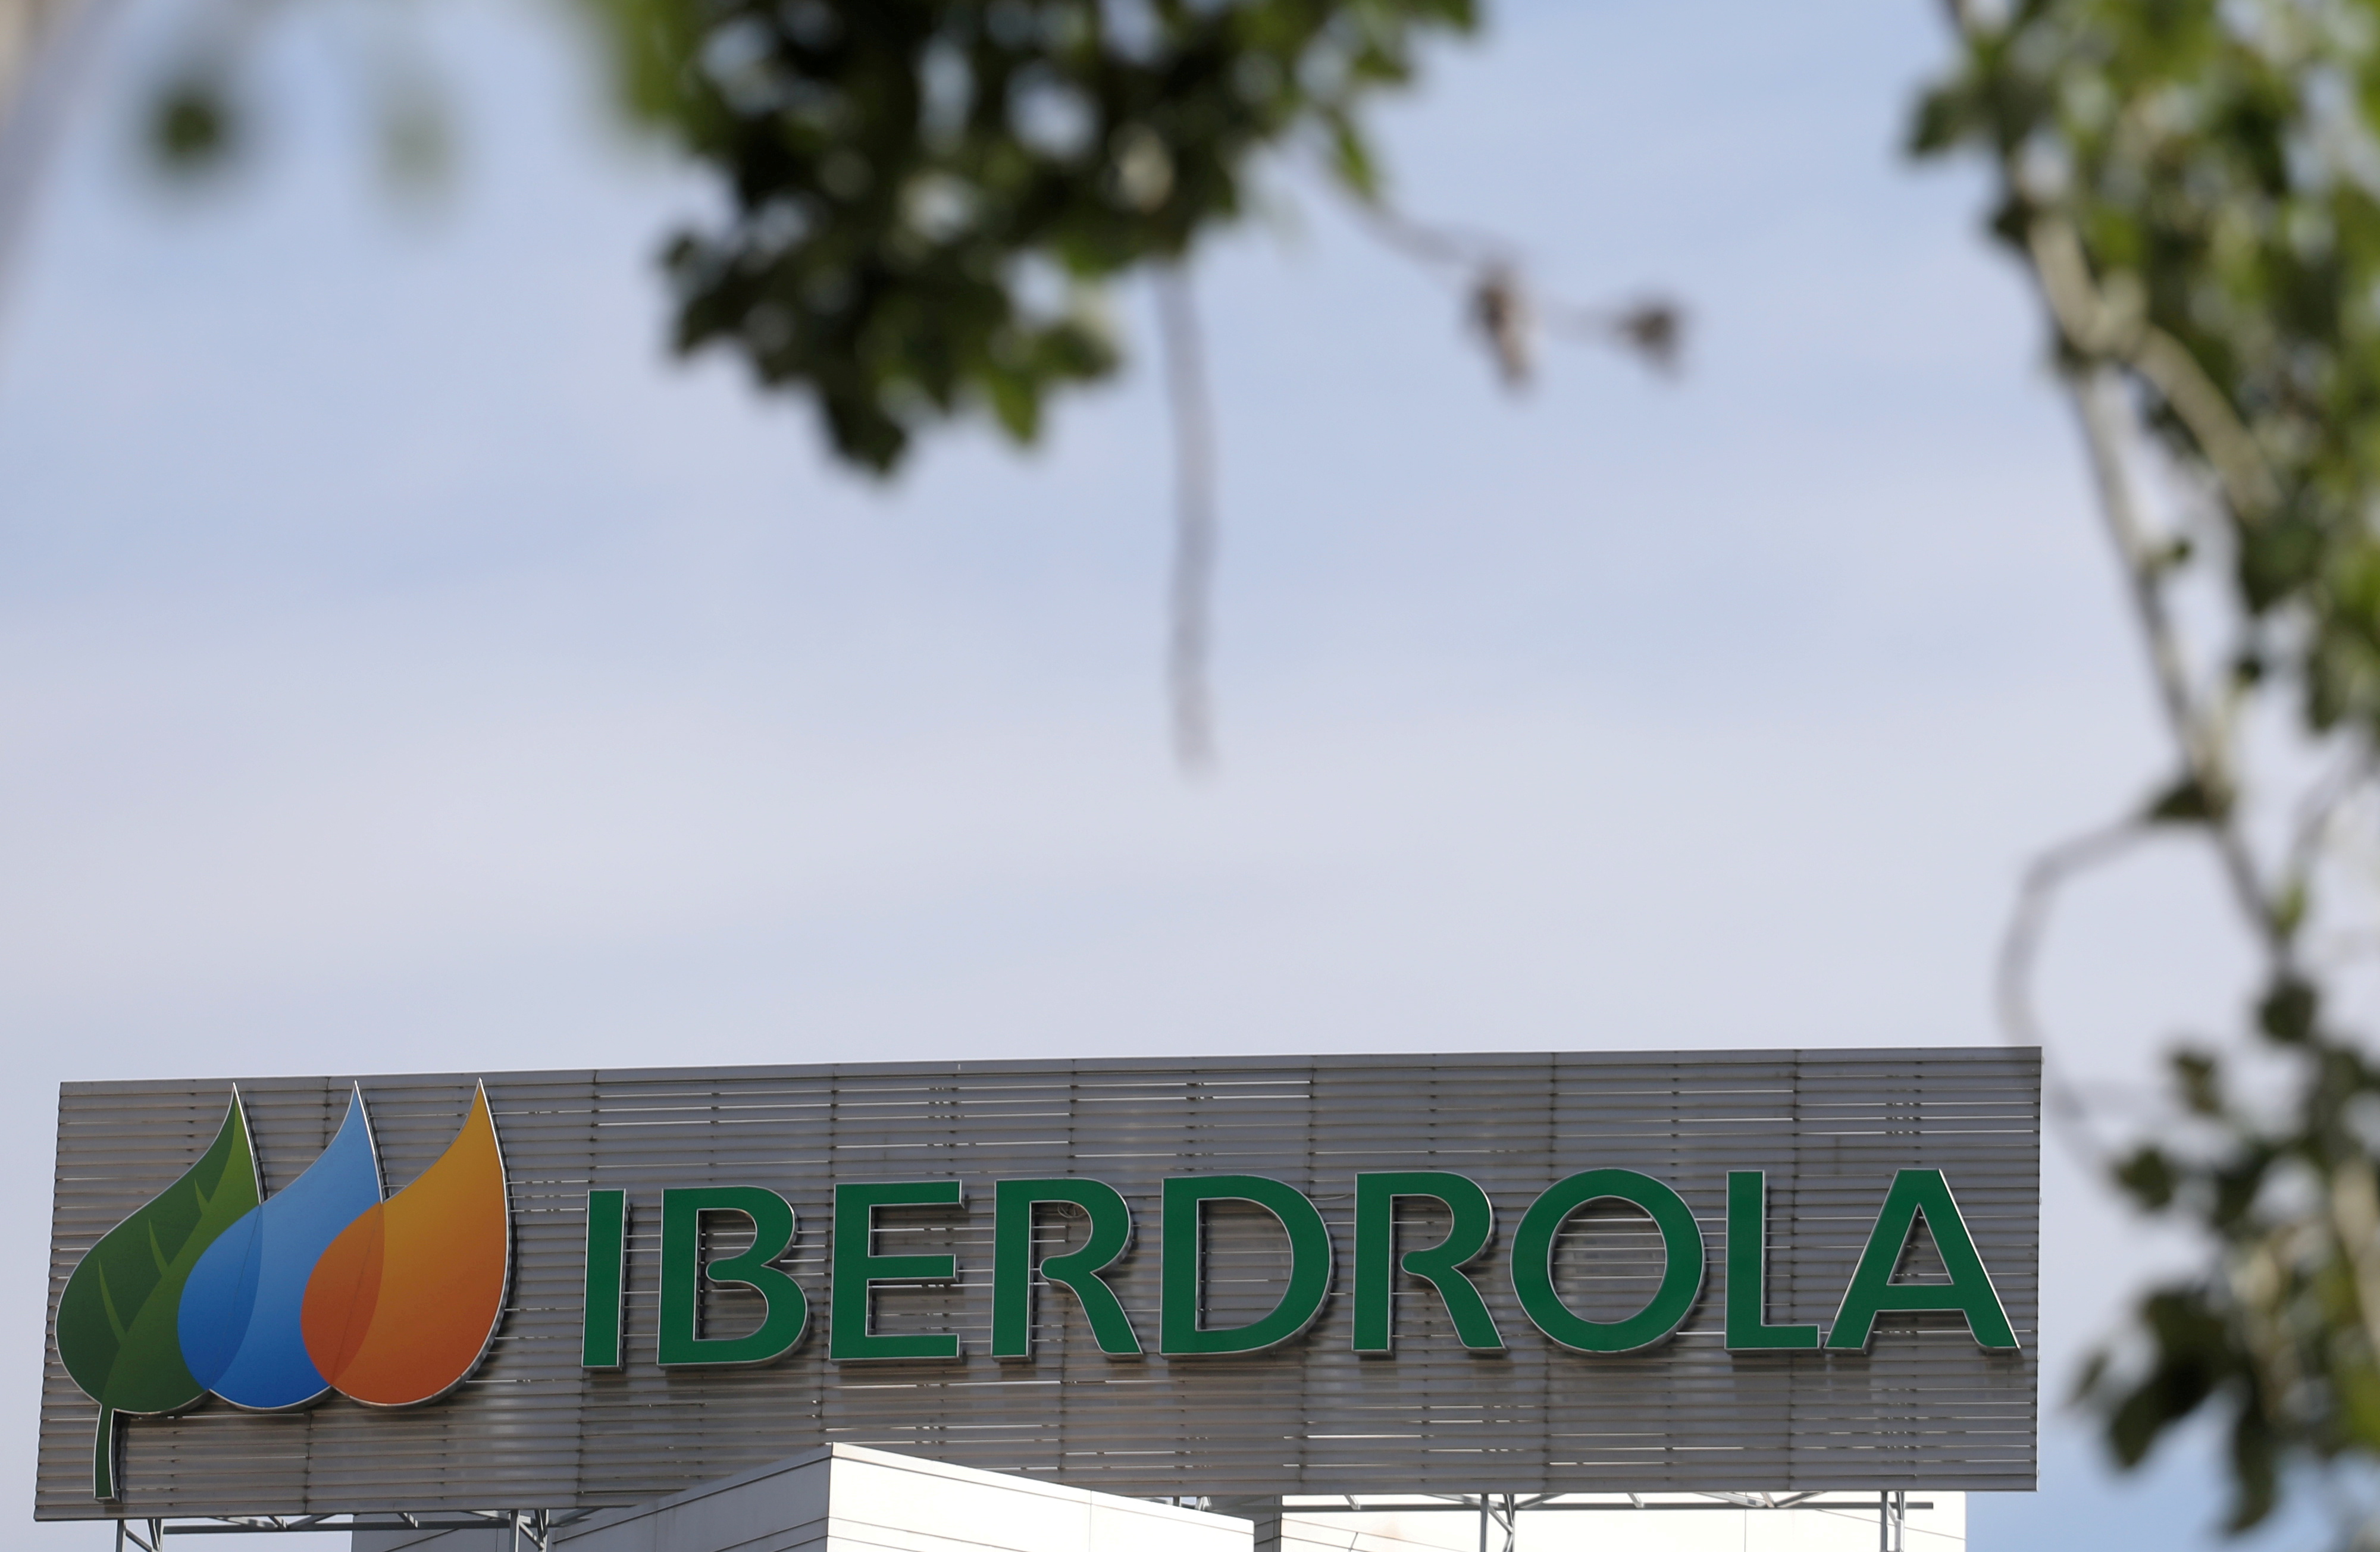 The logo of Spanish utility company Iberdrola is seen outside its headquarters in Madrid, Spain, May 23, 2018. REUTERS/Sergio Perez/File Photo